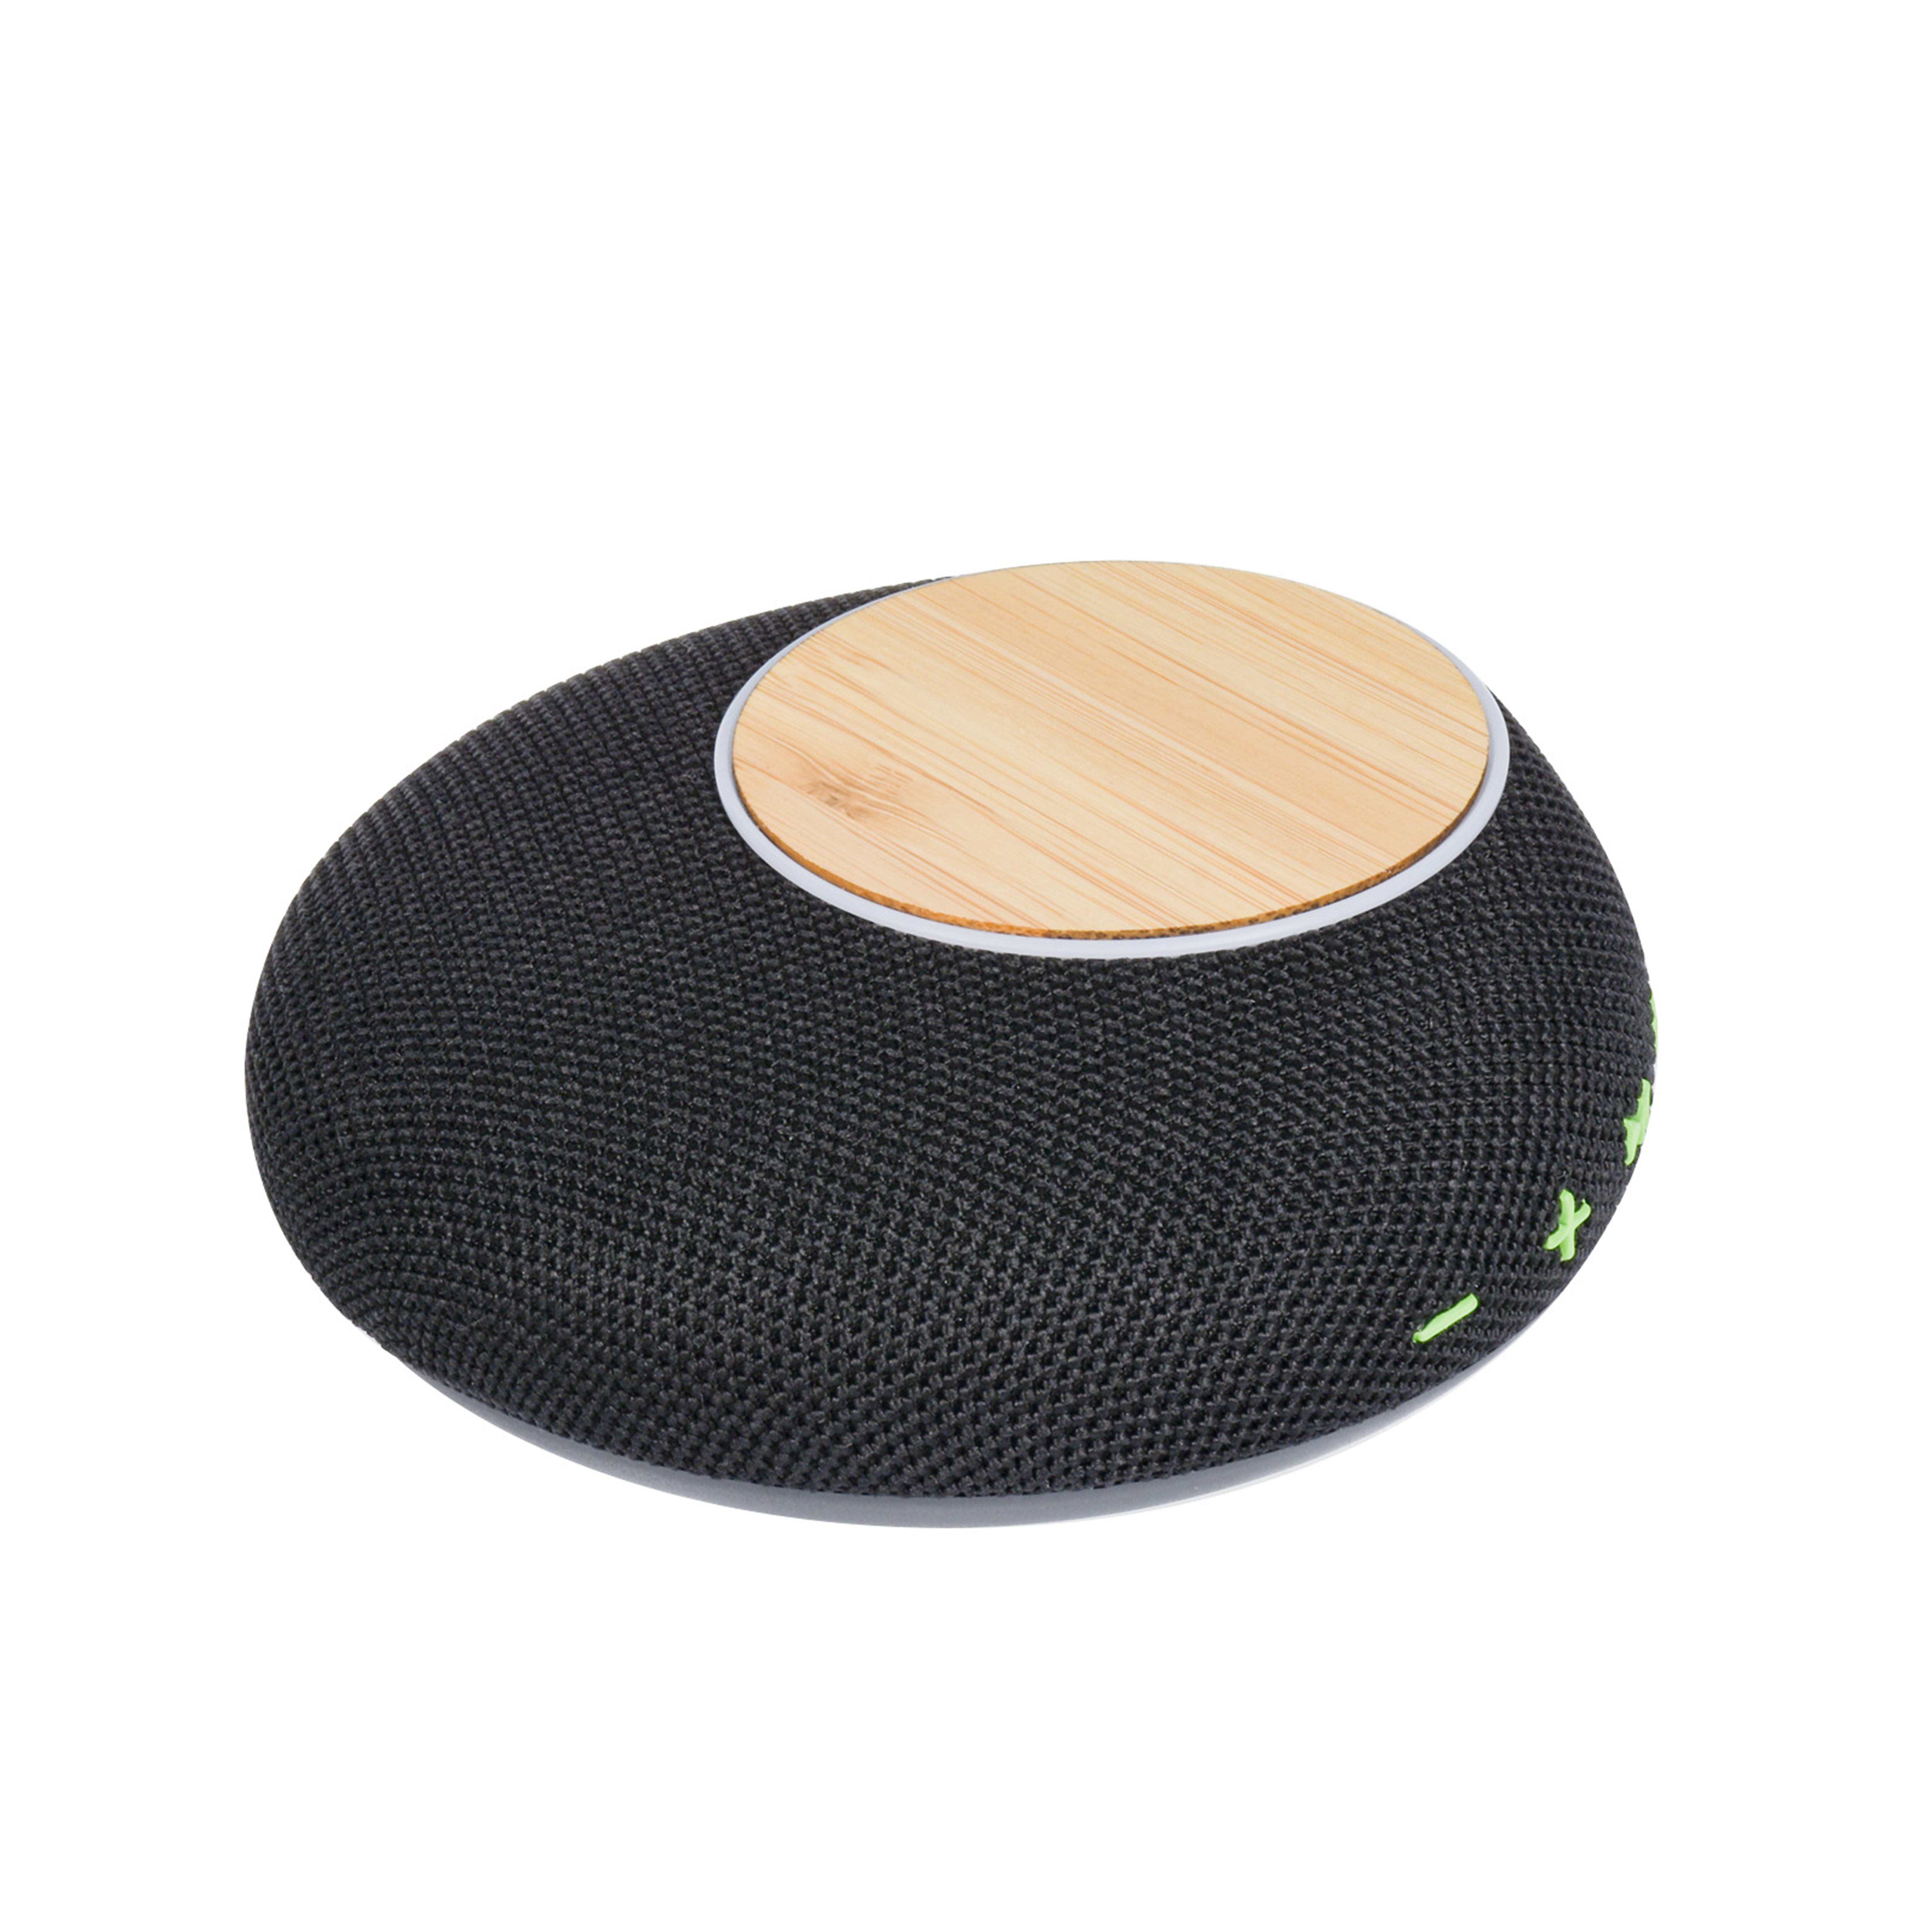 Three in one wireless charging portable Bluetooth speaker 5W bamboo wood wireless charging mobile power speaker